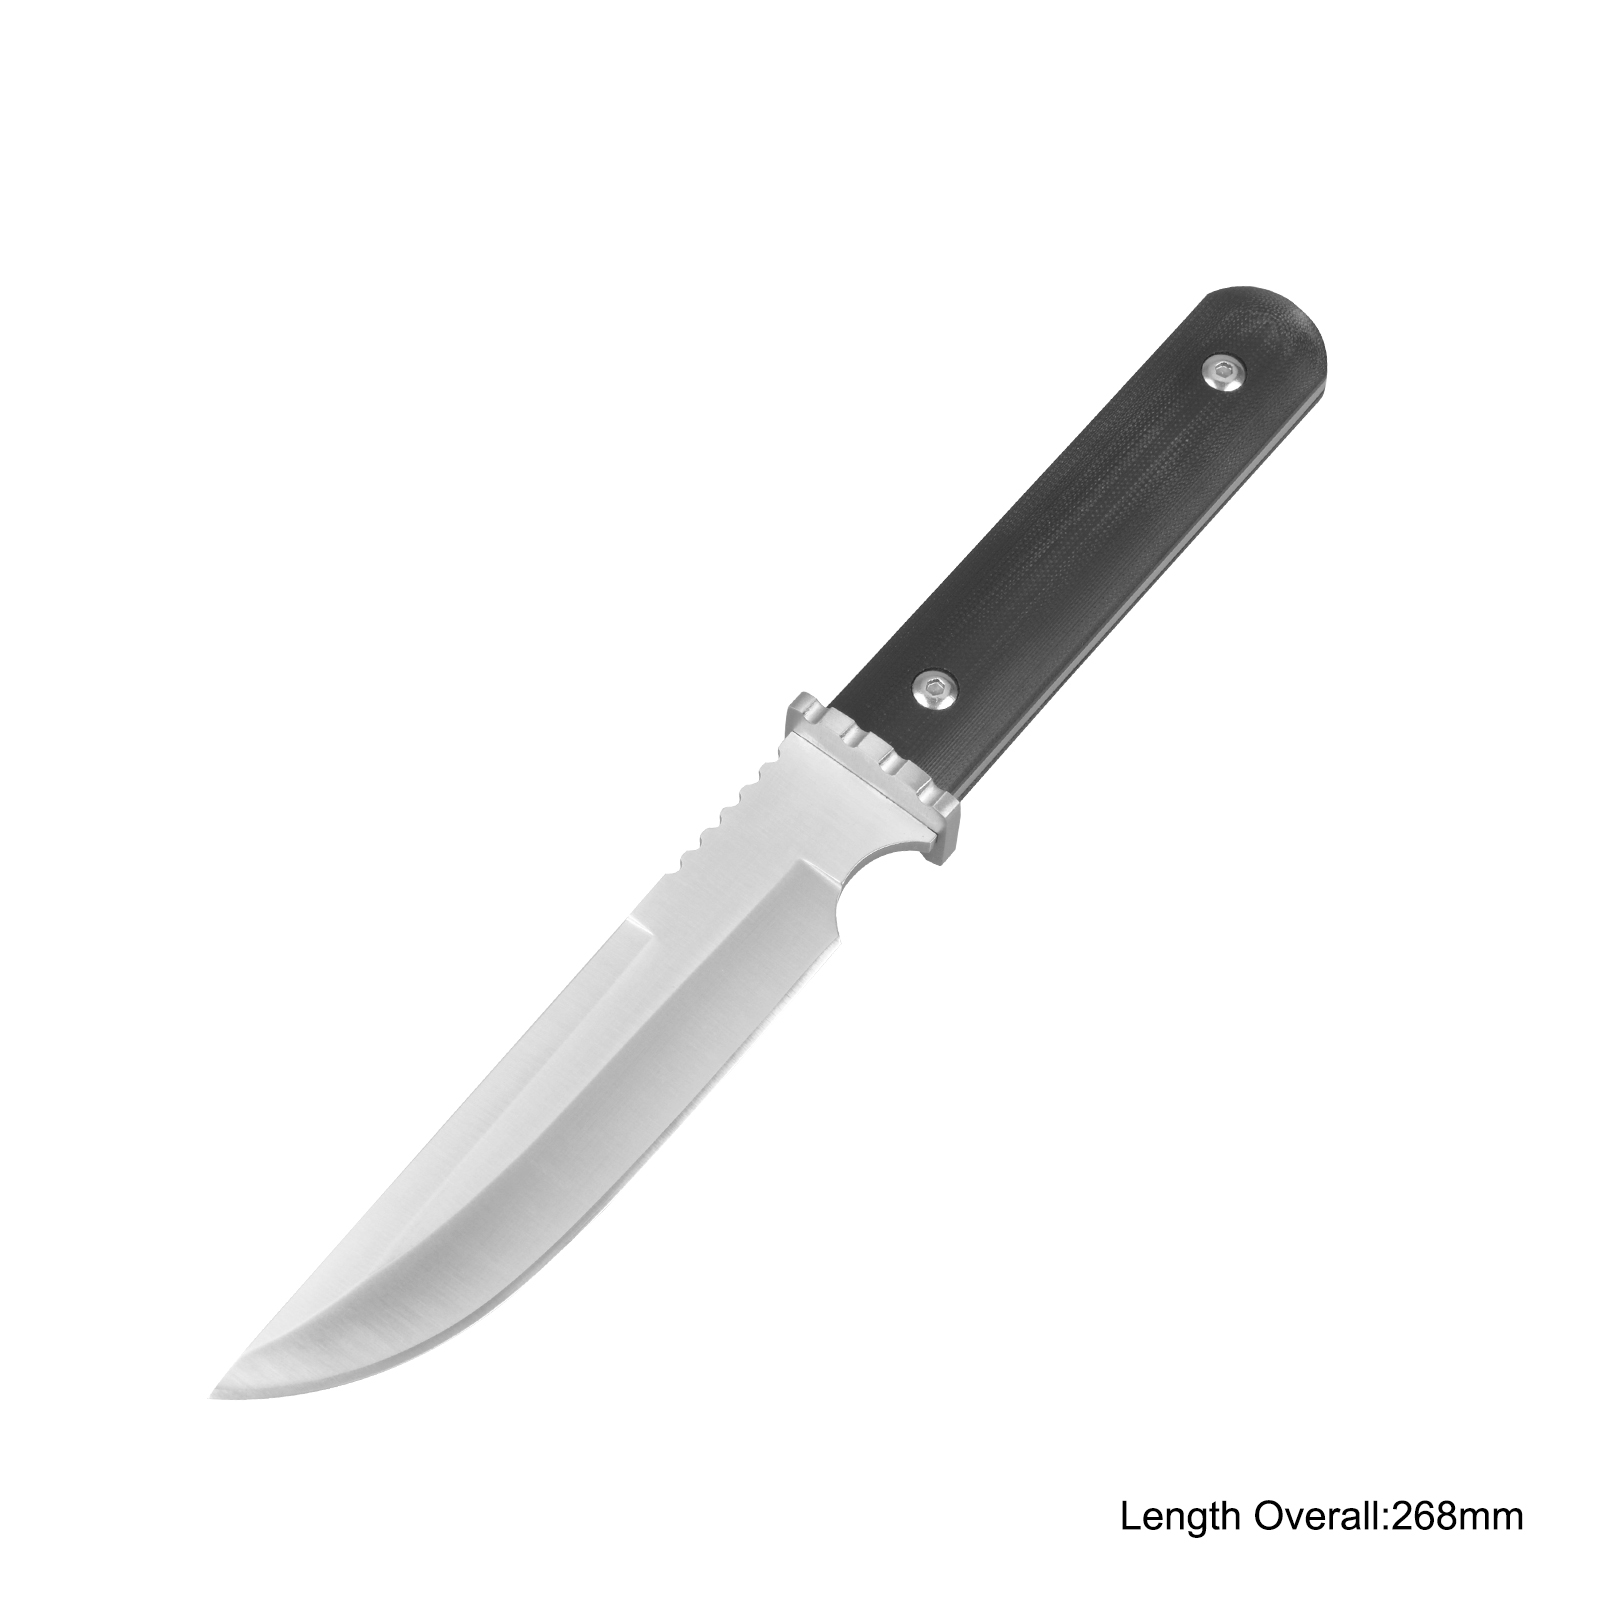 Products / Fixed-bladed Knife / G10 Handle-Plenty Harvest